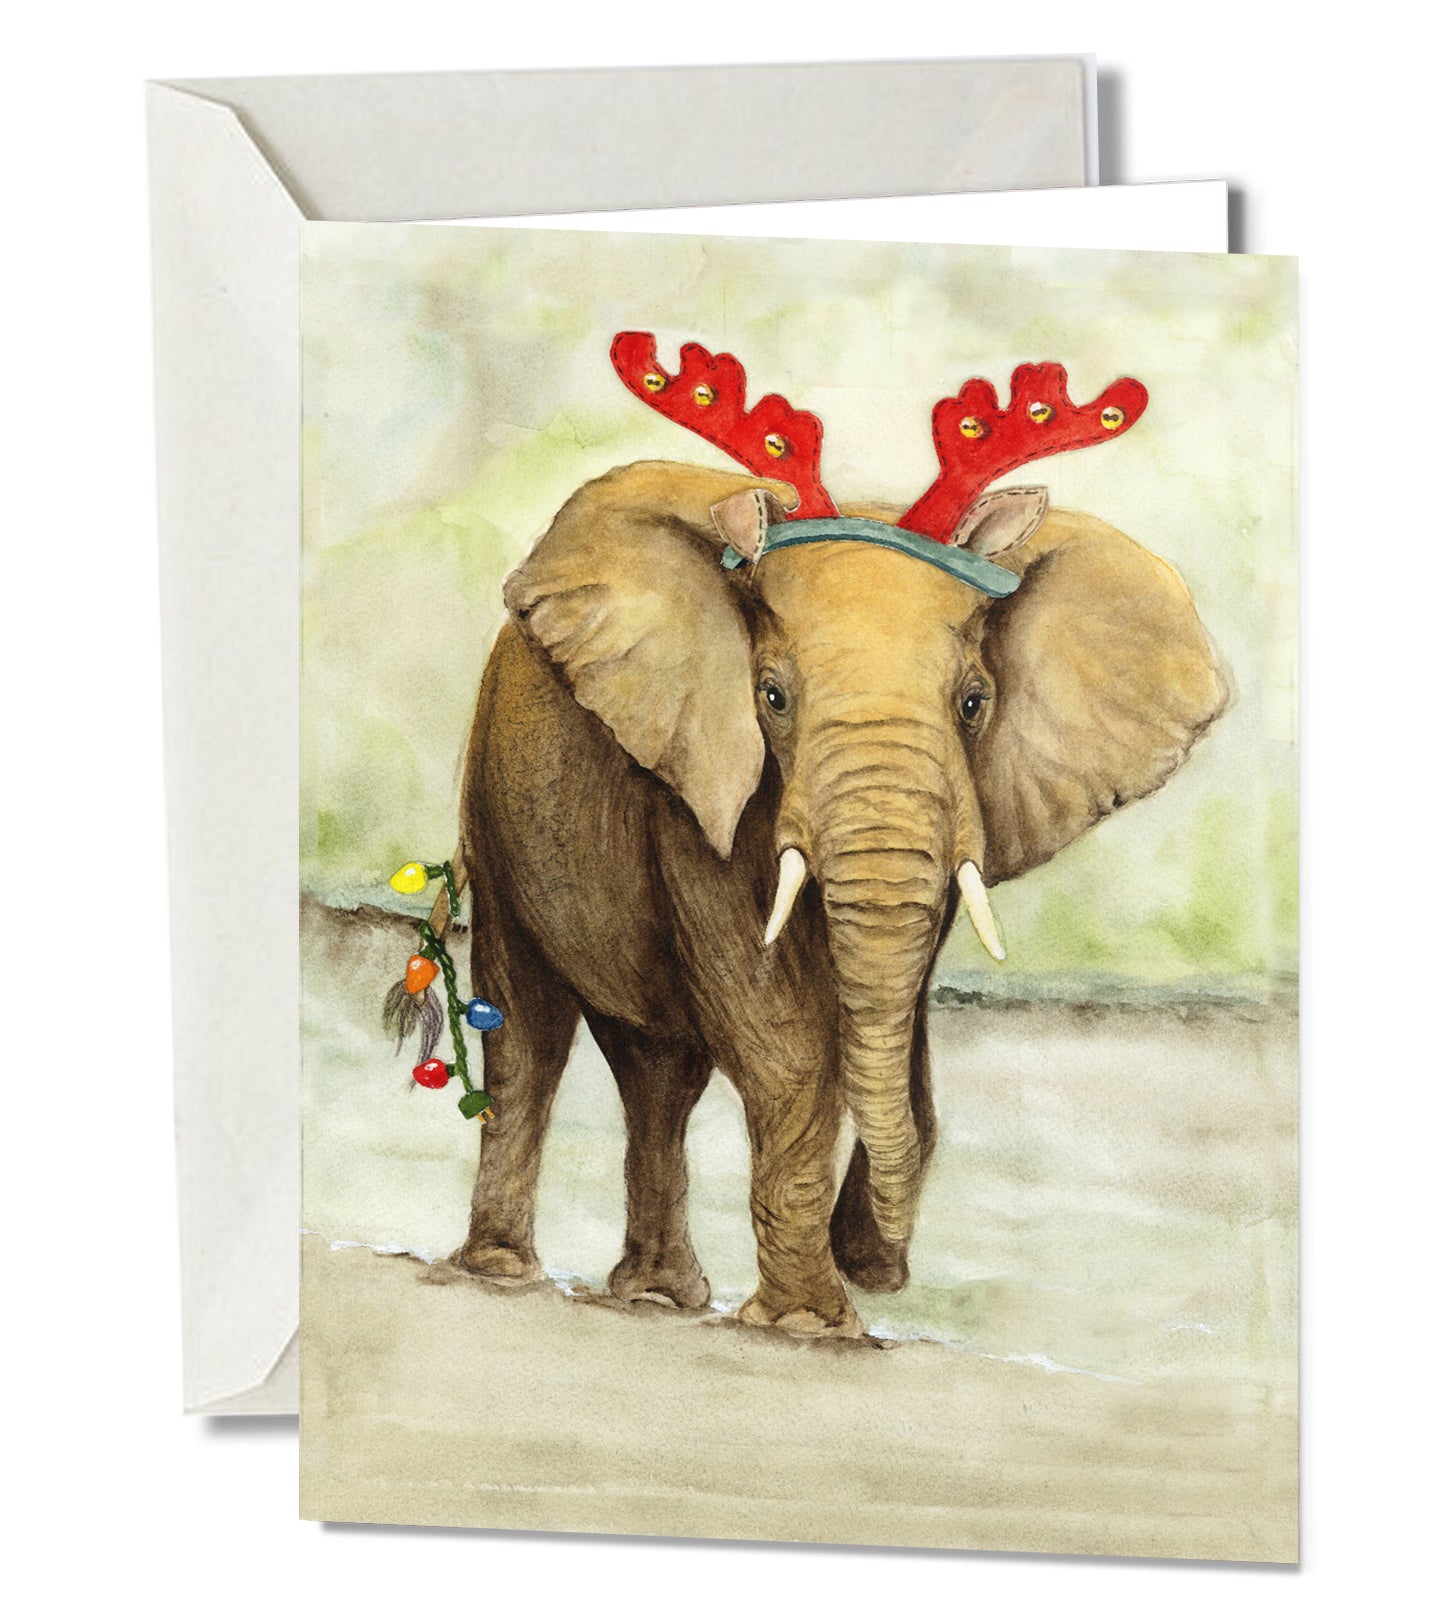 African Animal Holiday Note Cards